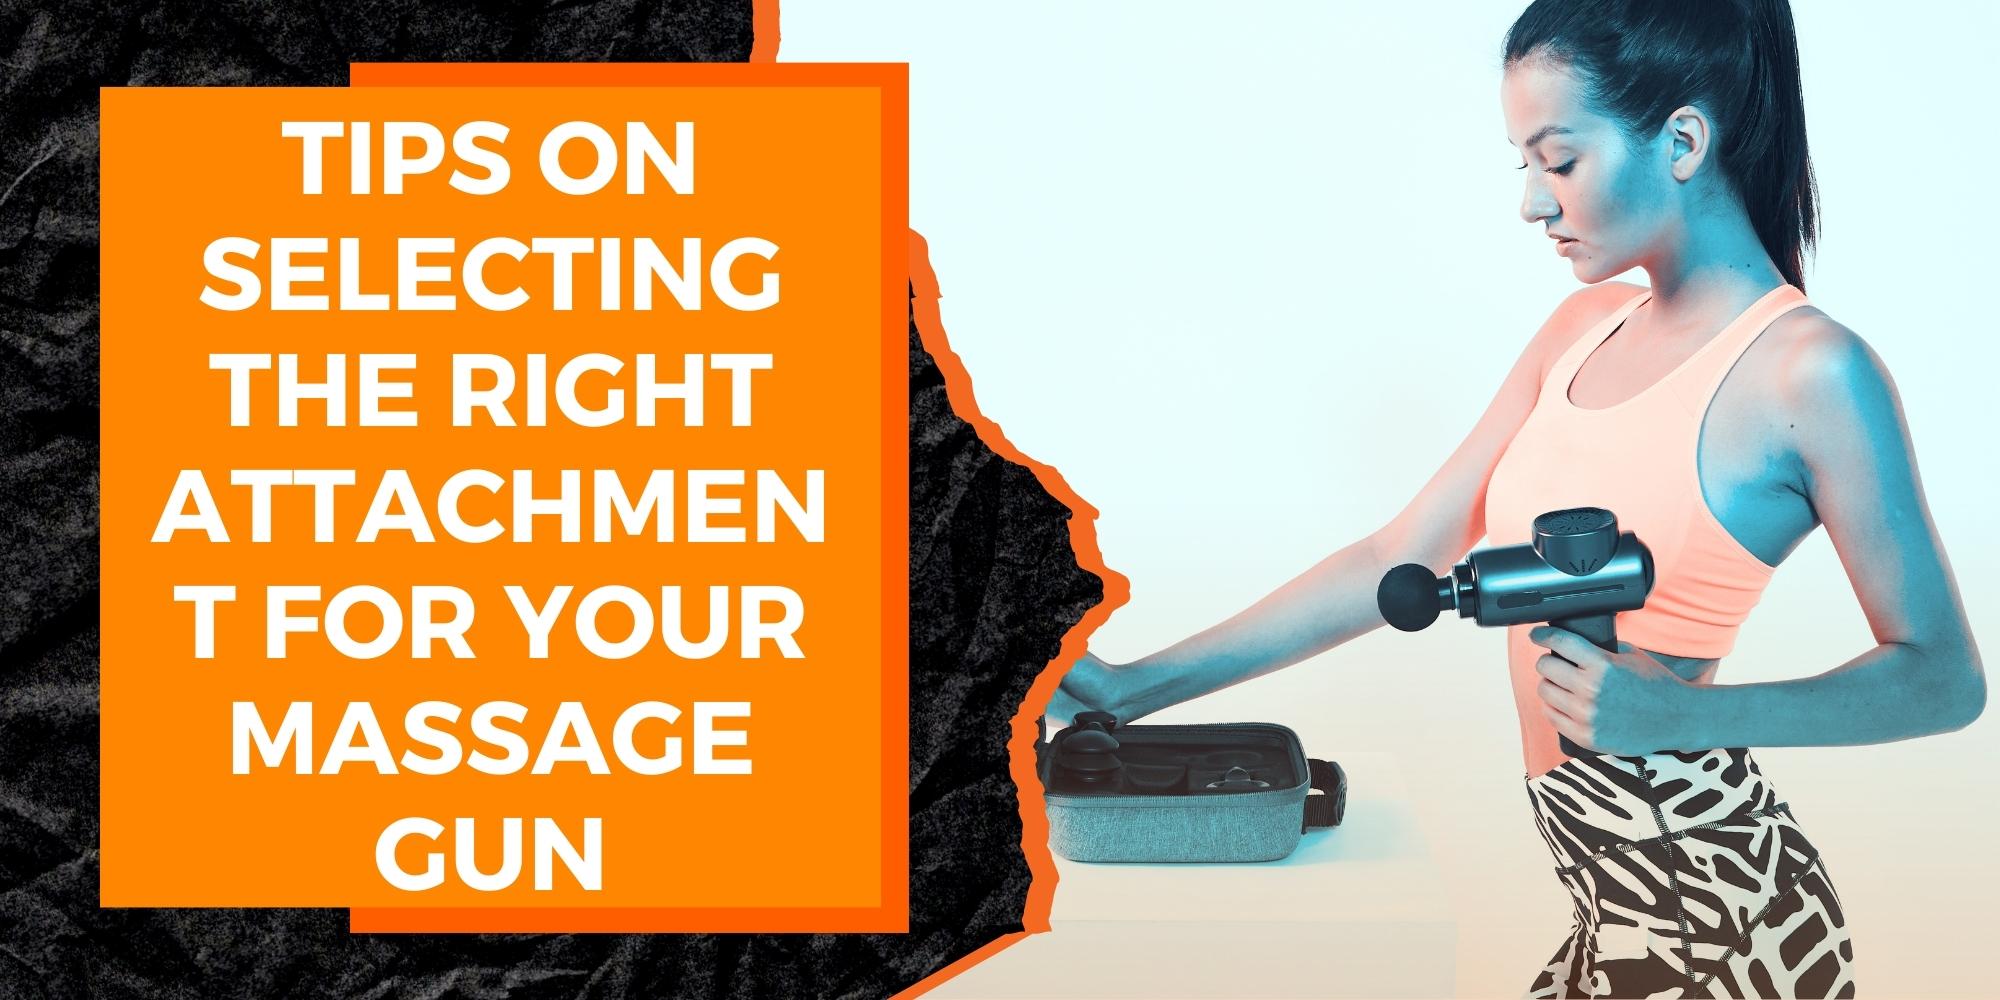 Tips on Selecting the Right Attachment for Your Massage Gun